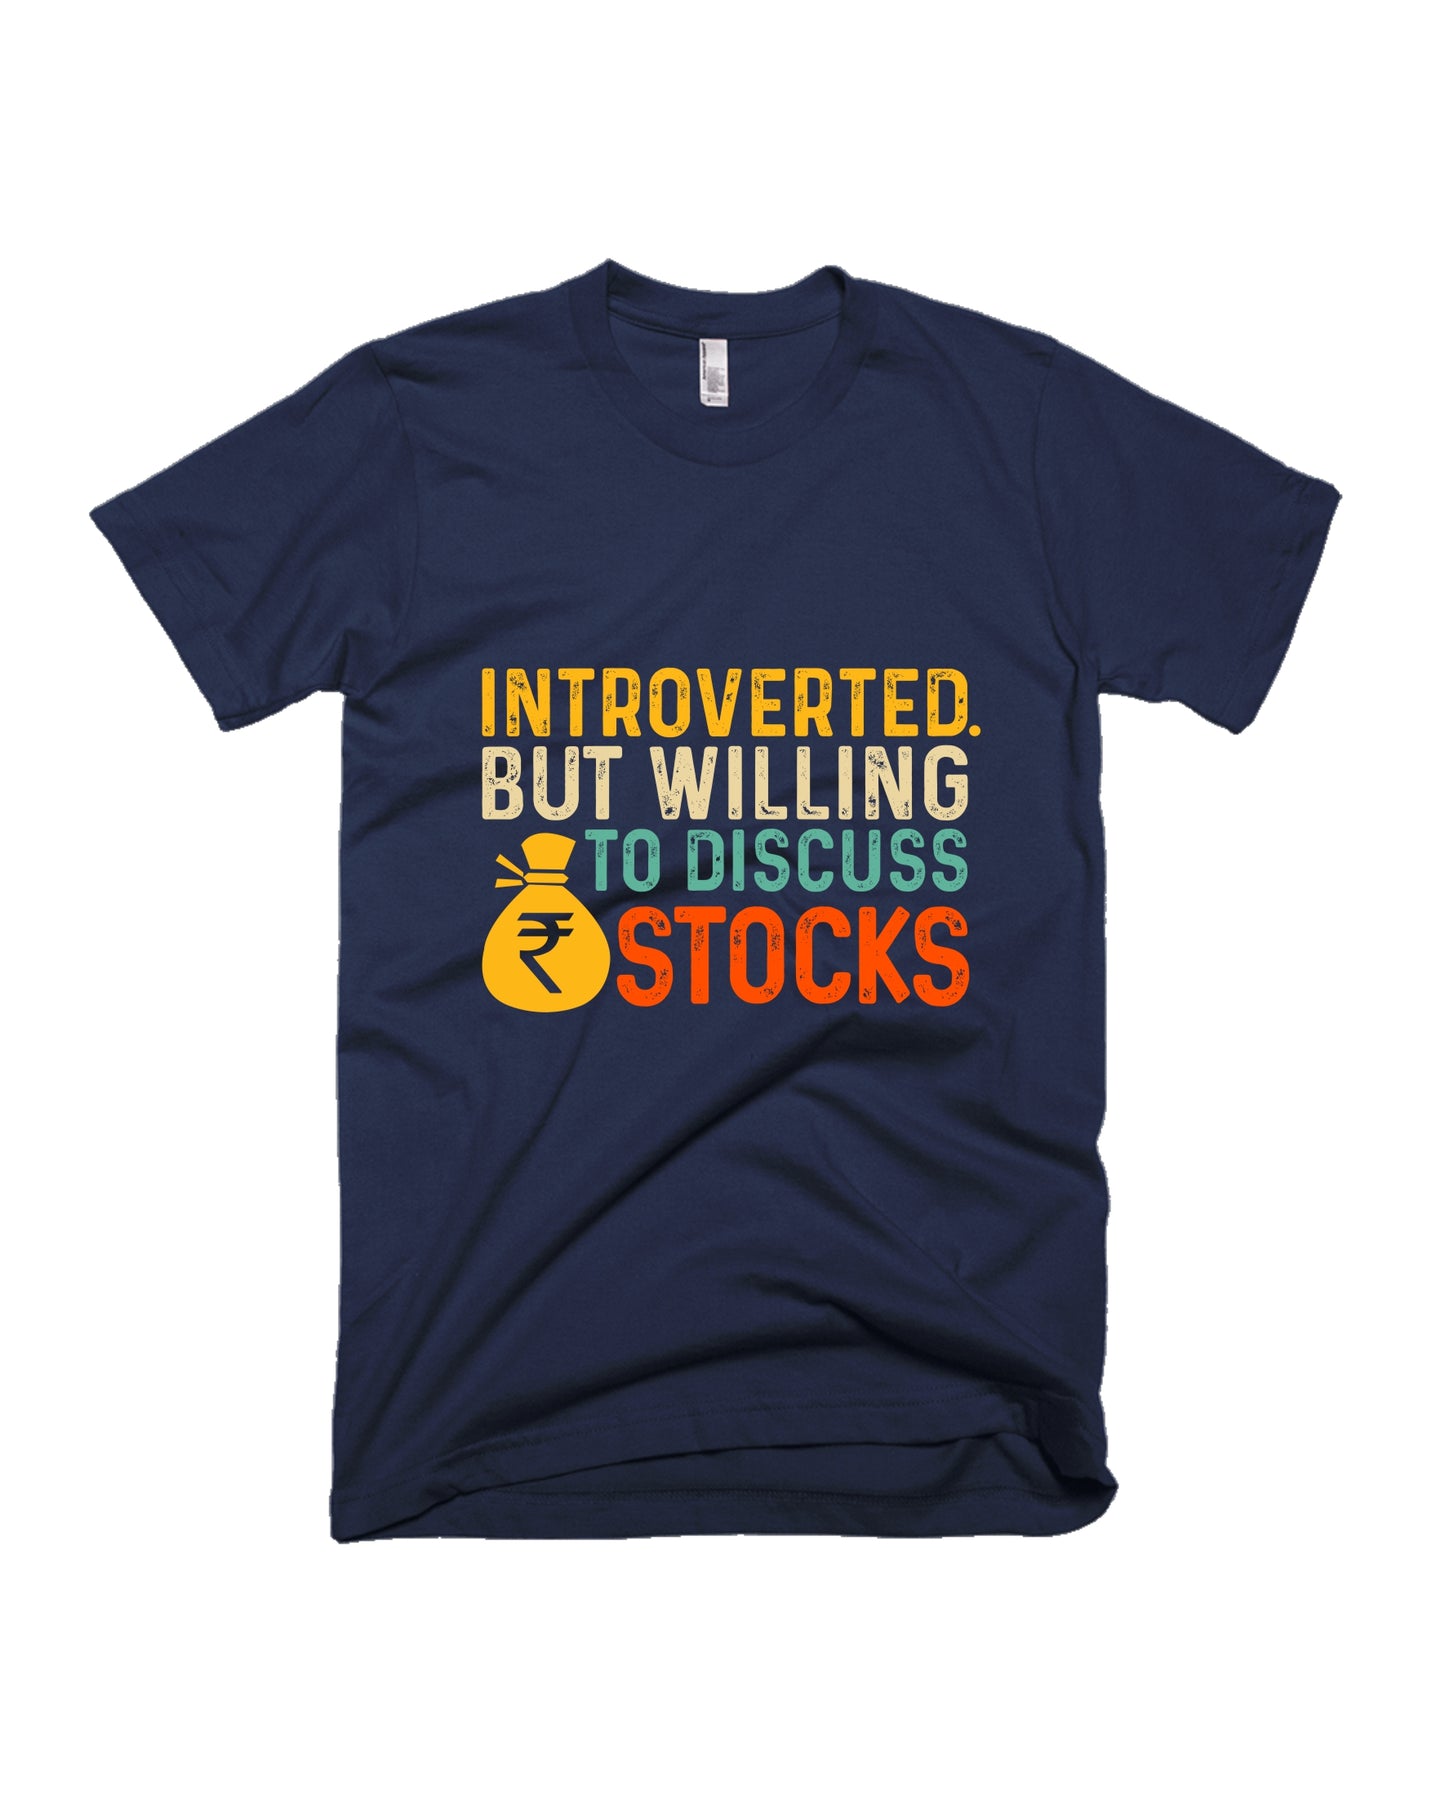 Introverted - Navy Blue - Unisex Adults T-shirt